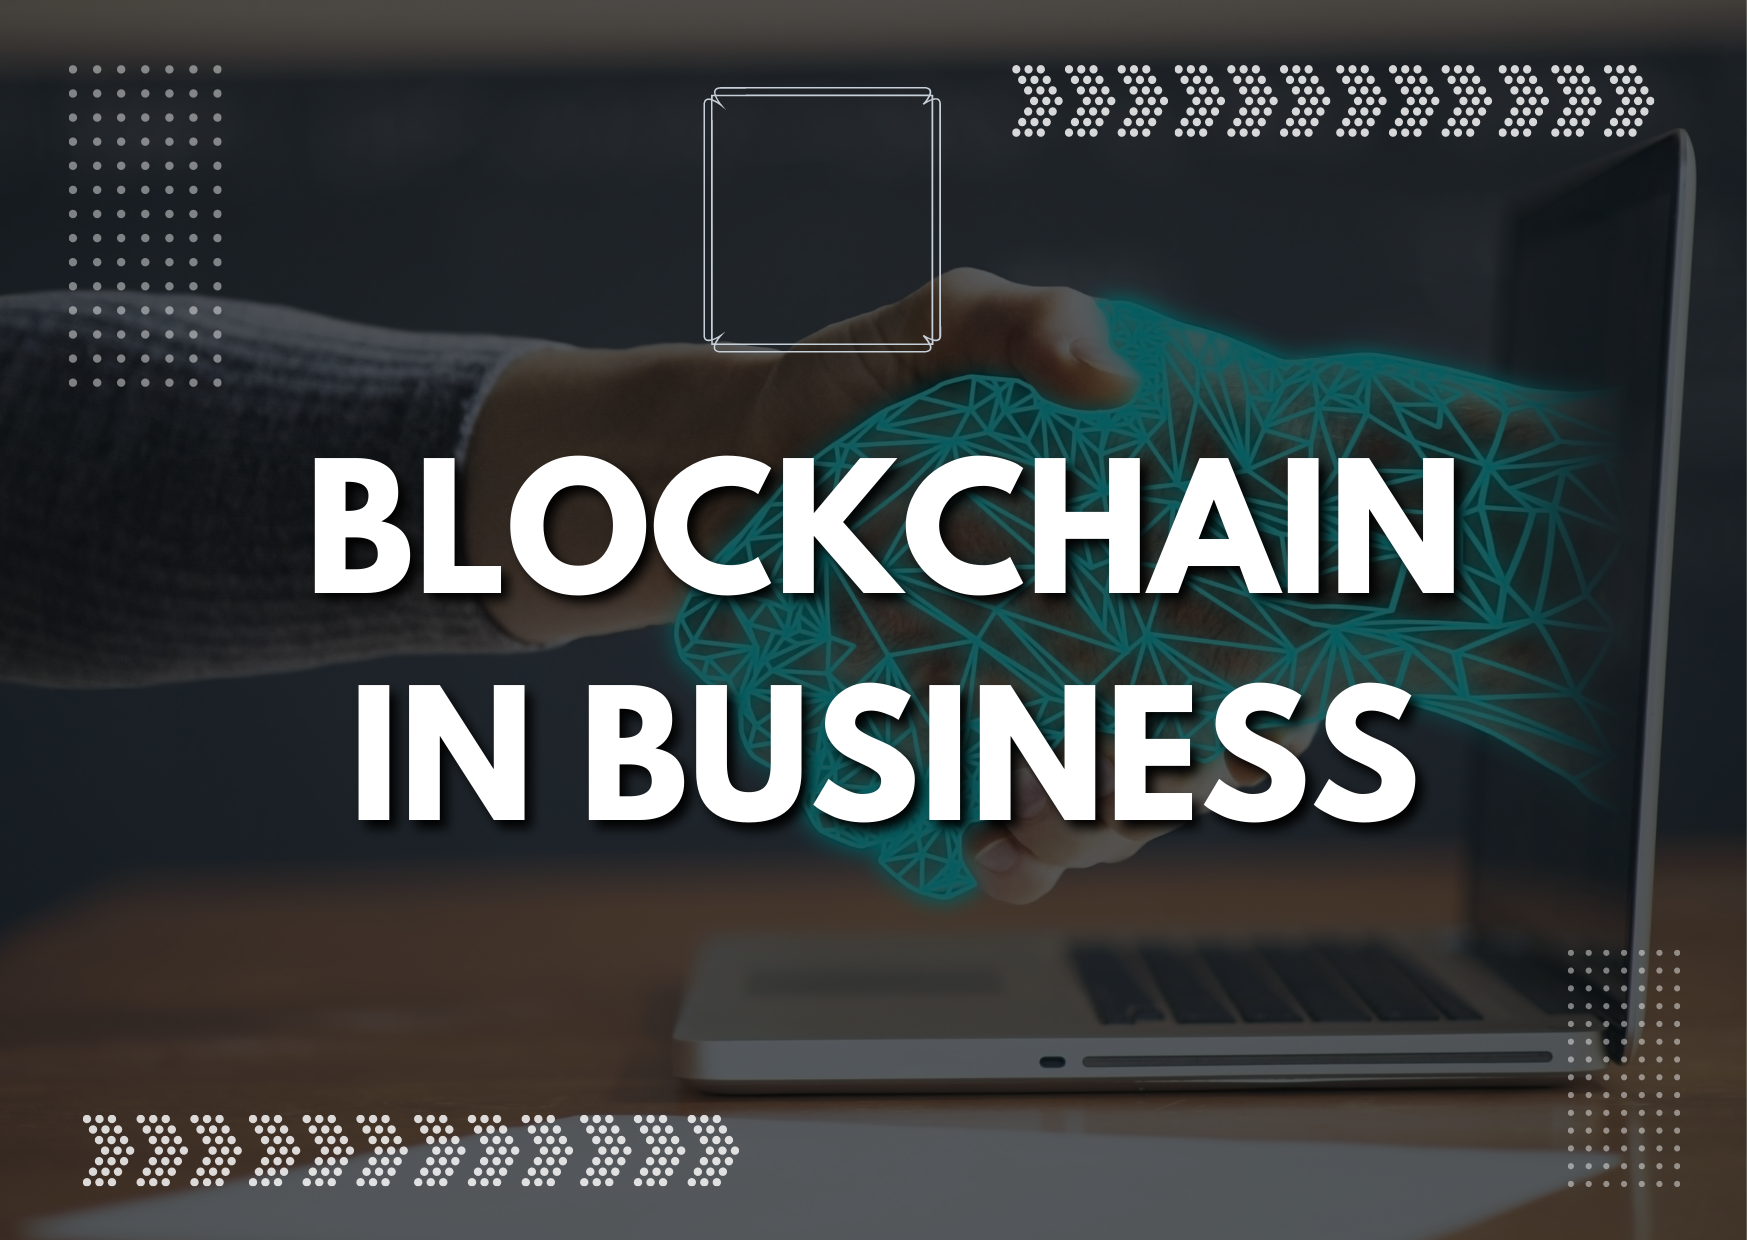 Everything About BlockChain in Business